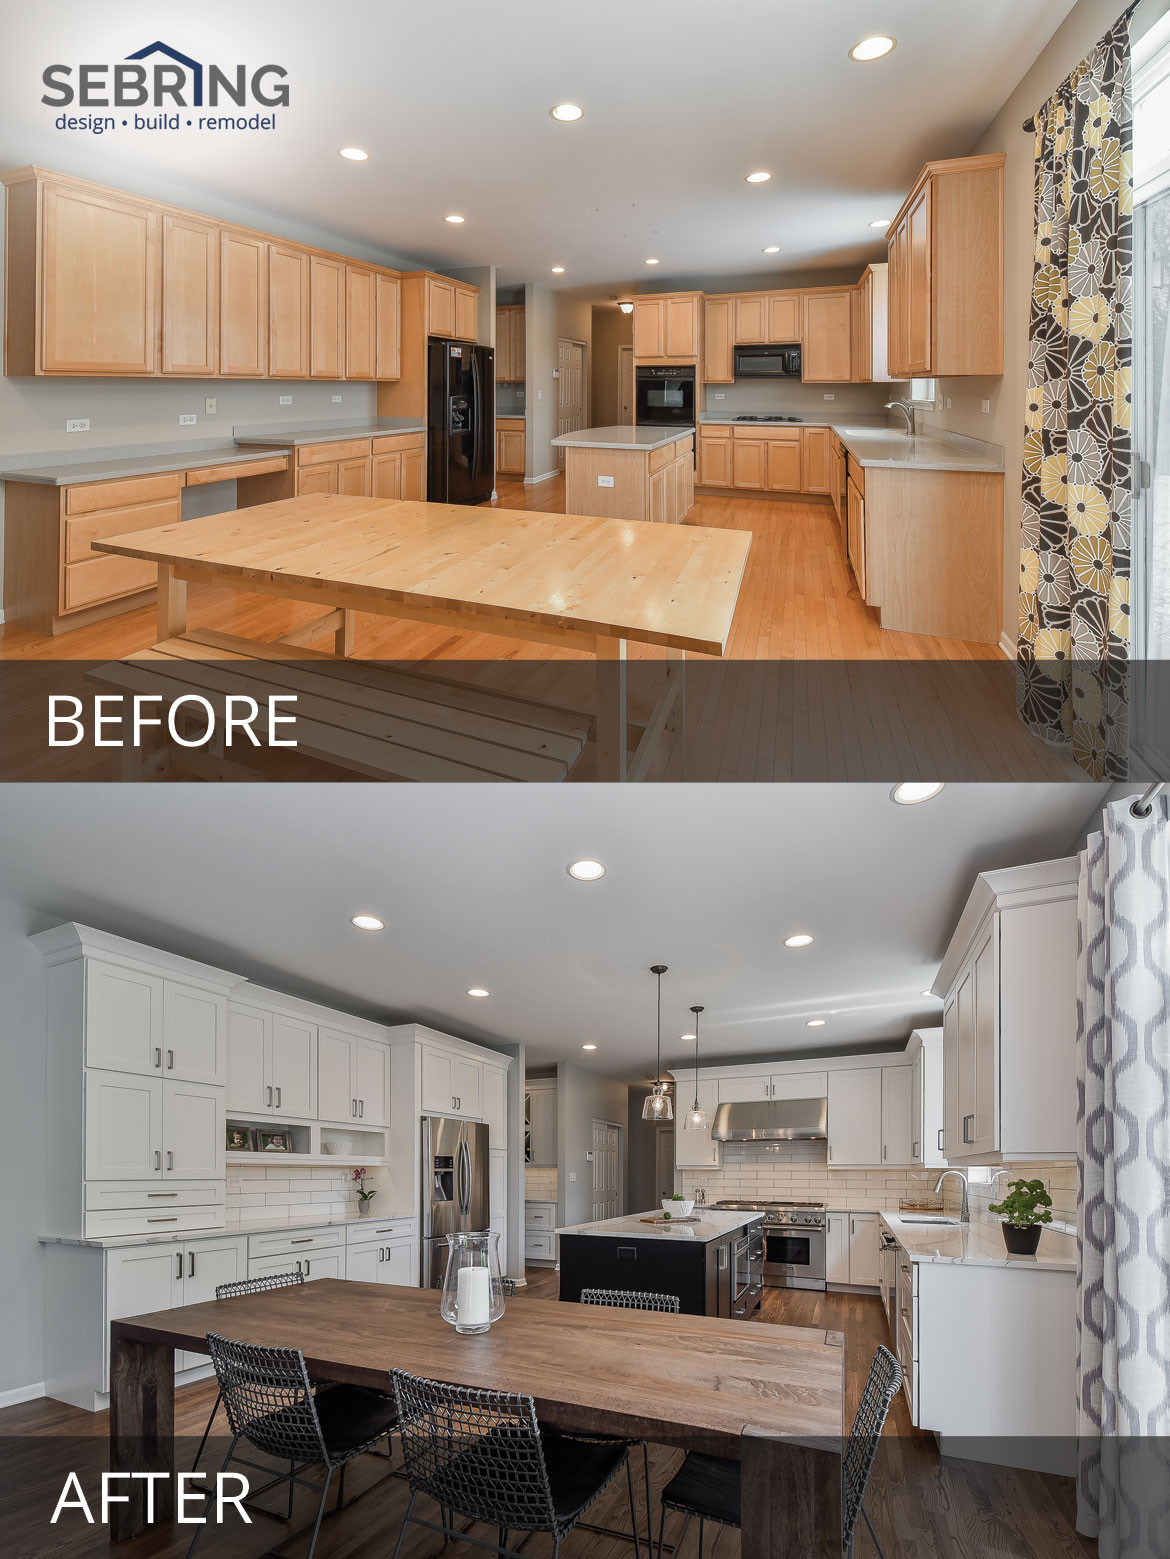 Kitchen Remodel Before And After
 Pete & Mary s Kitchen Before & After